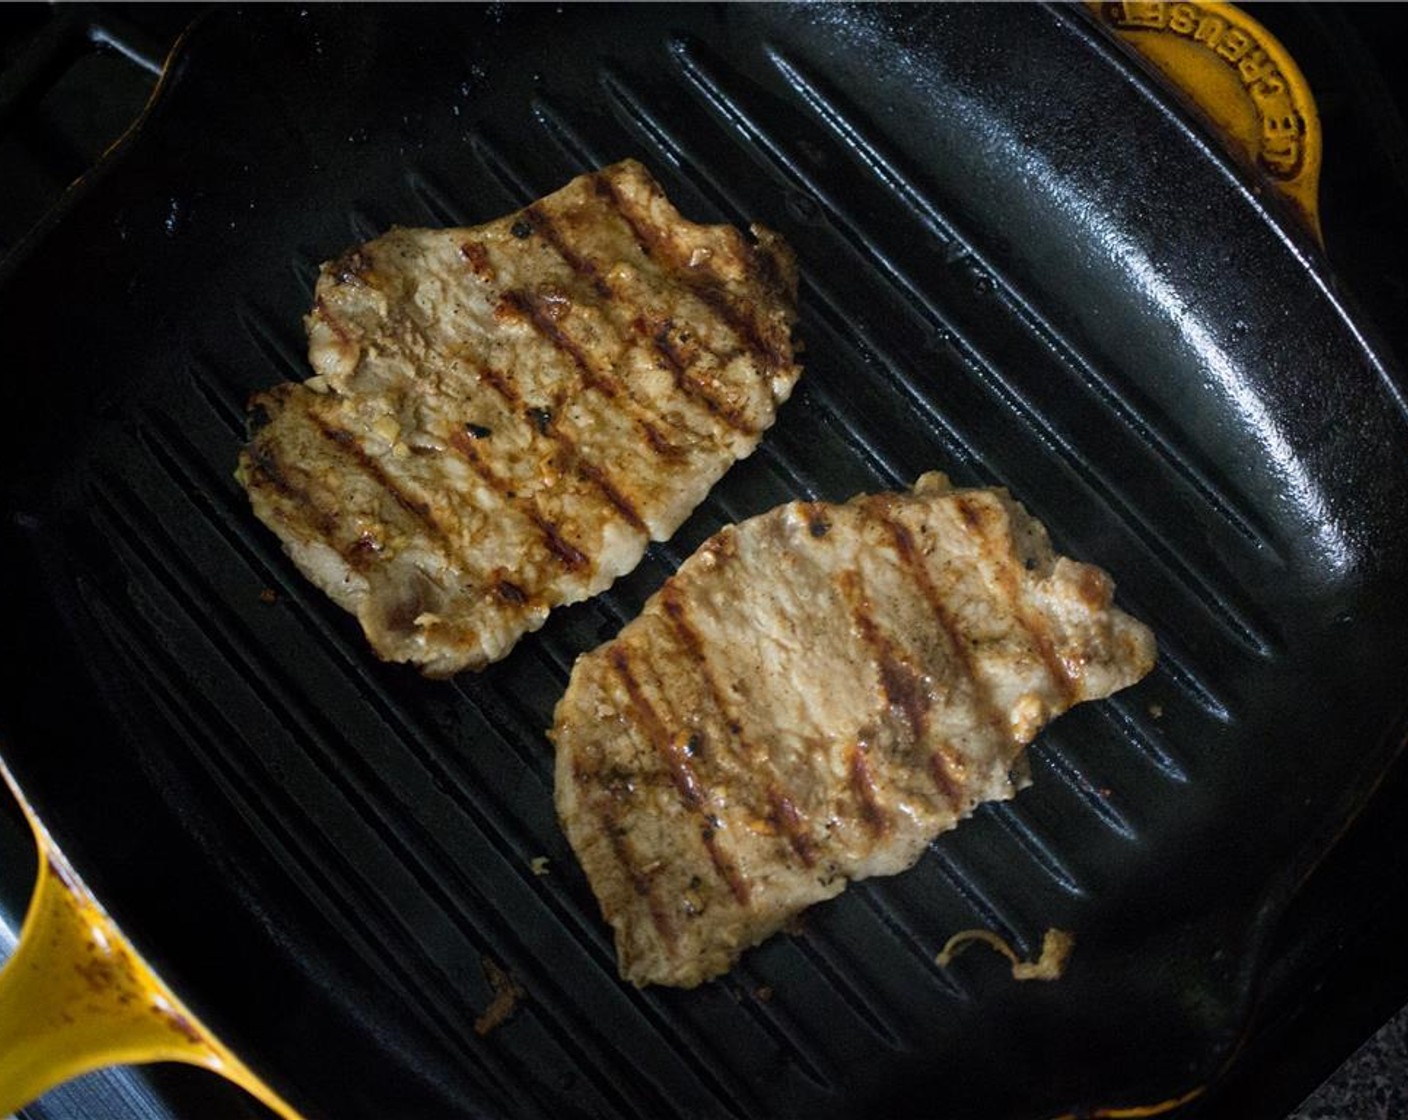 step 6 Heat a grill pan or another heavy-bottomed skillet over high heat – let the pan get ‘screaming’ hot. Working in batches, add the pork. Cook for 1-2 minutes per side, or until cooked through.